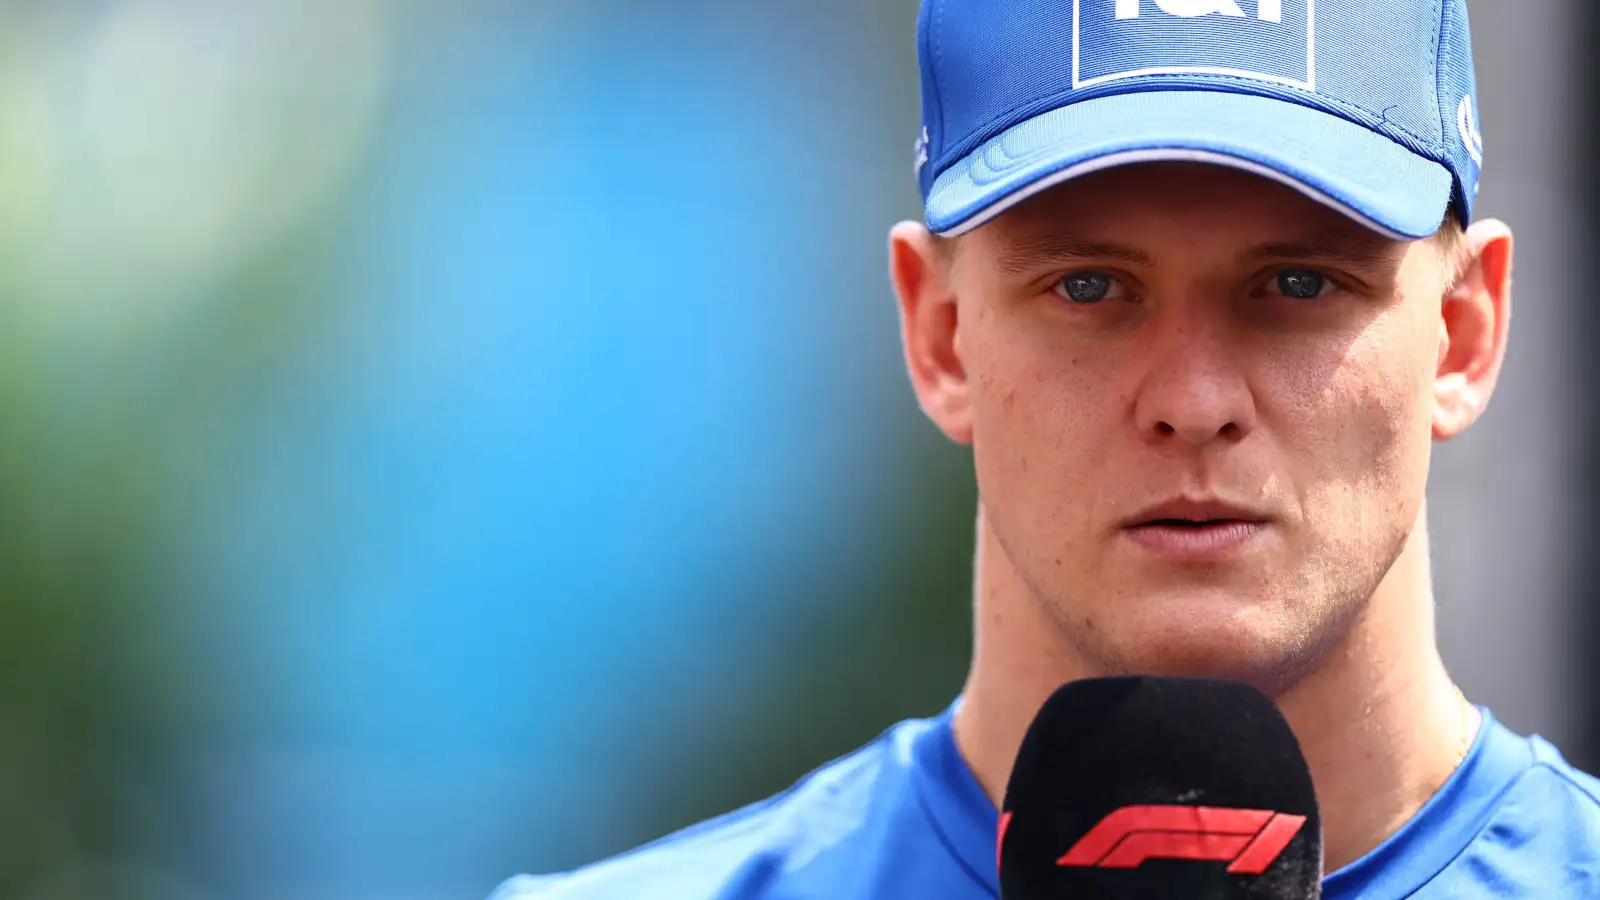 Mick Schumacher serious standing in front of the F1 mic. Mexico October 2022